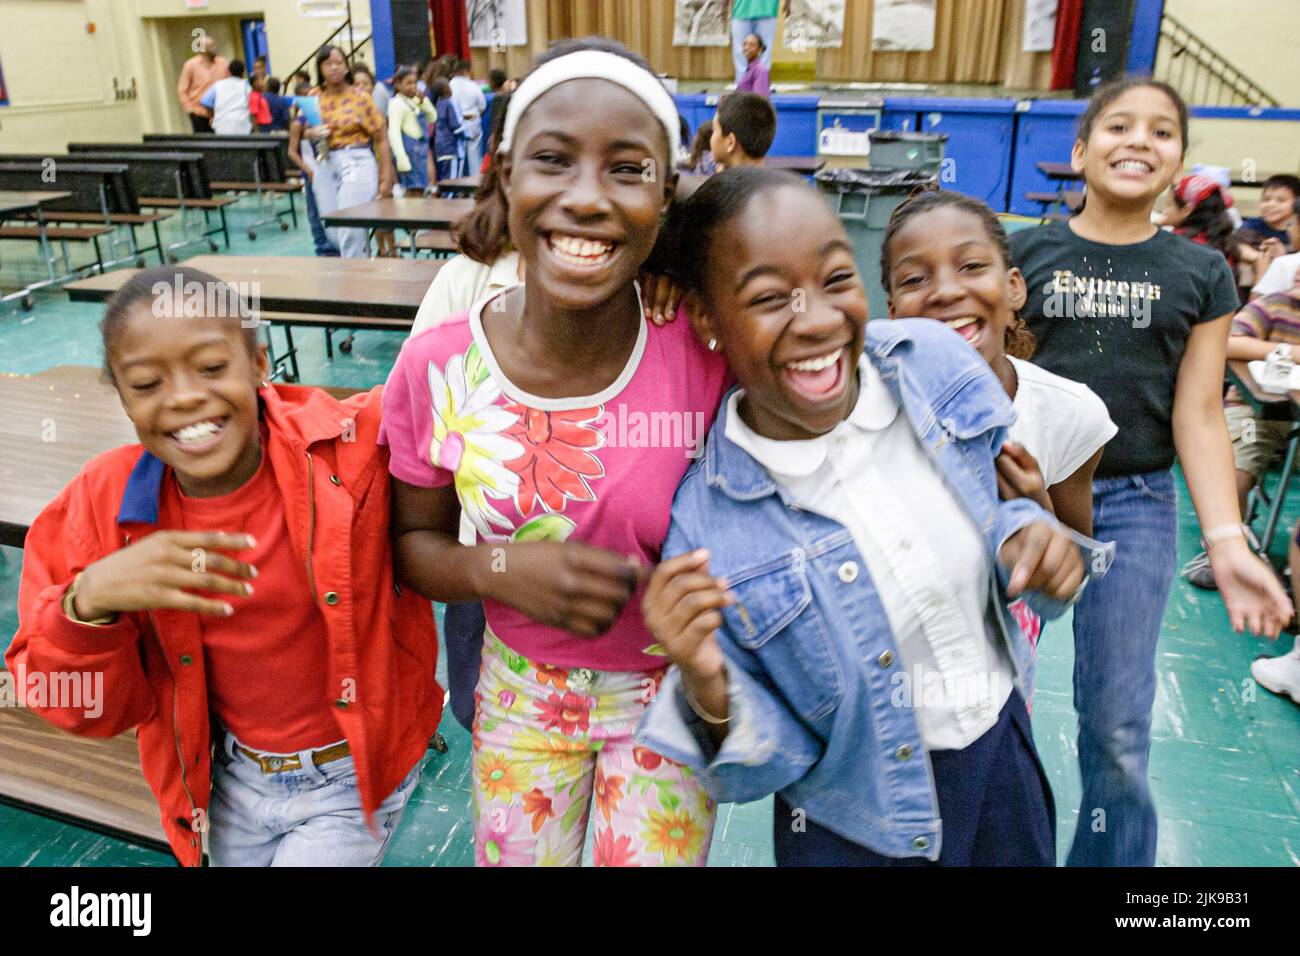 Miami Florida,Frederick Douglass Elementary School,low income neighborhood community,Black African students girls friends cafeteria lunchroom tables Stock Photo